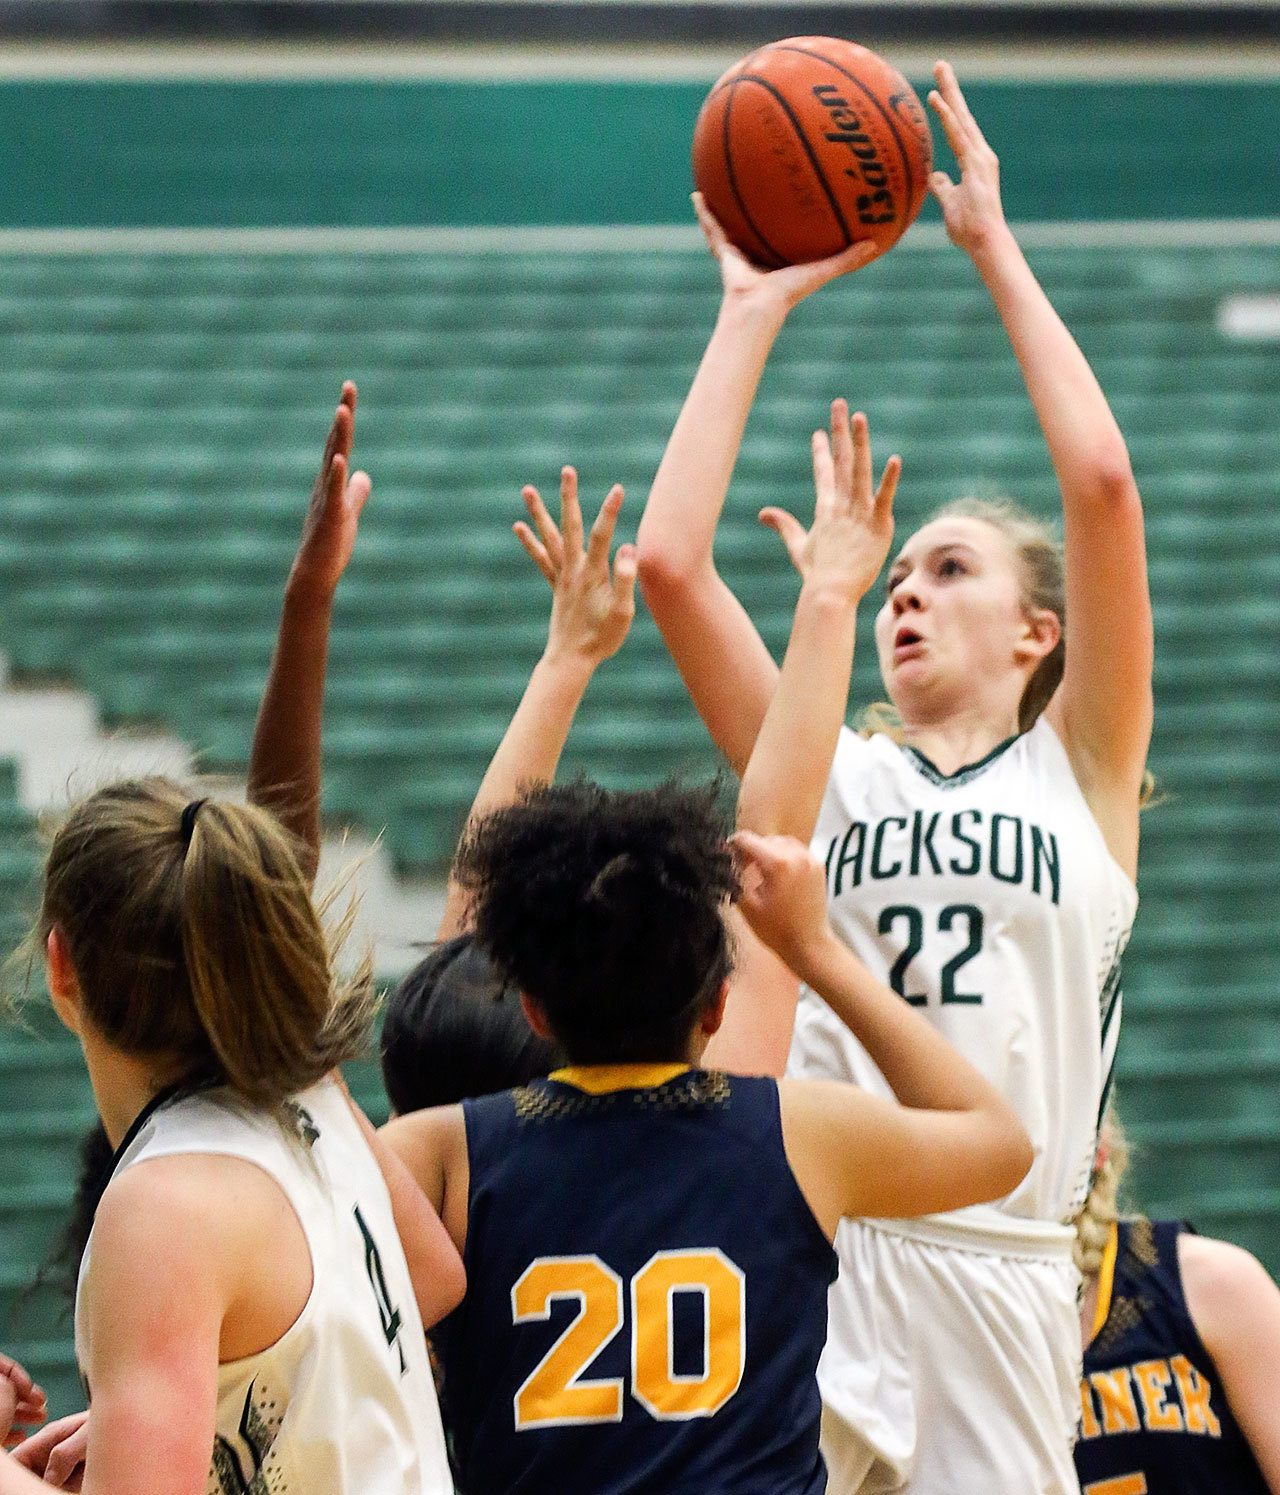 Jackson’s Lauren Schillberg goes up for a shot during a game against Mariner on Wednesday at Jackson High School. Jackson won 65-51. (Kevin Clark / The Herald)